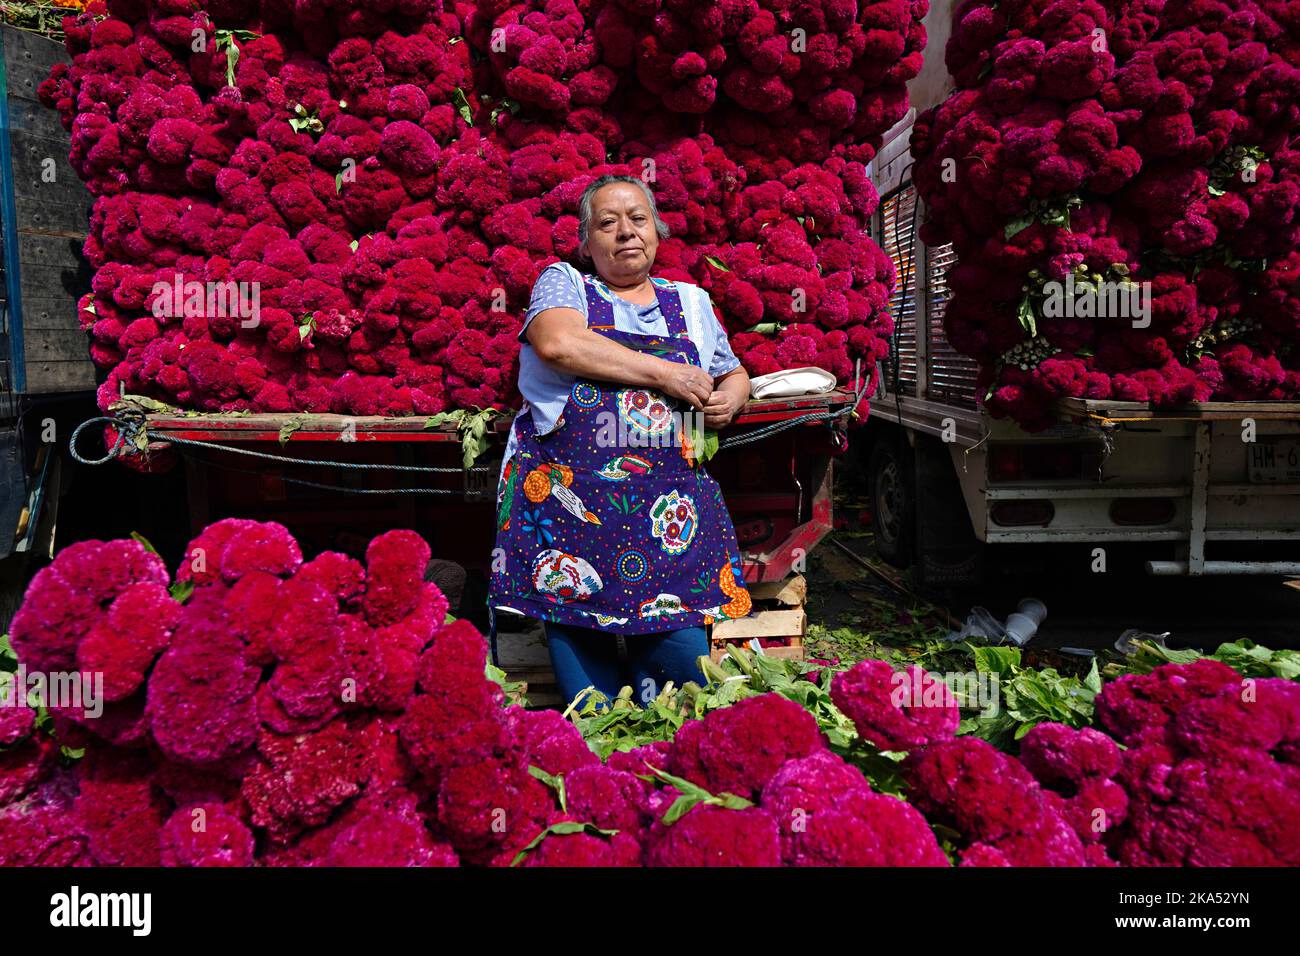 Mexico City, Mexico. 31st Oct, 2022. A flower seller waits for customers behind a giant stack of red cockscomb flowers used to decorate altars and gravesites during the annual Day of the Dead festival at the Jamaica Flower Market, October 31, 2022 in Mexico City, Mexico. Credit: Richard Ellis/Richard Ellis/Alamy Live News Stock Photo